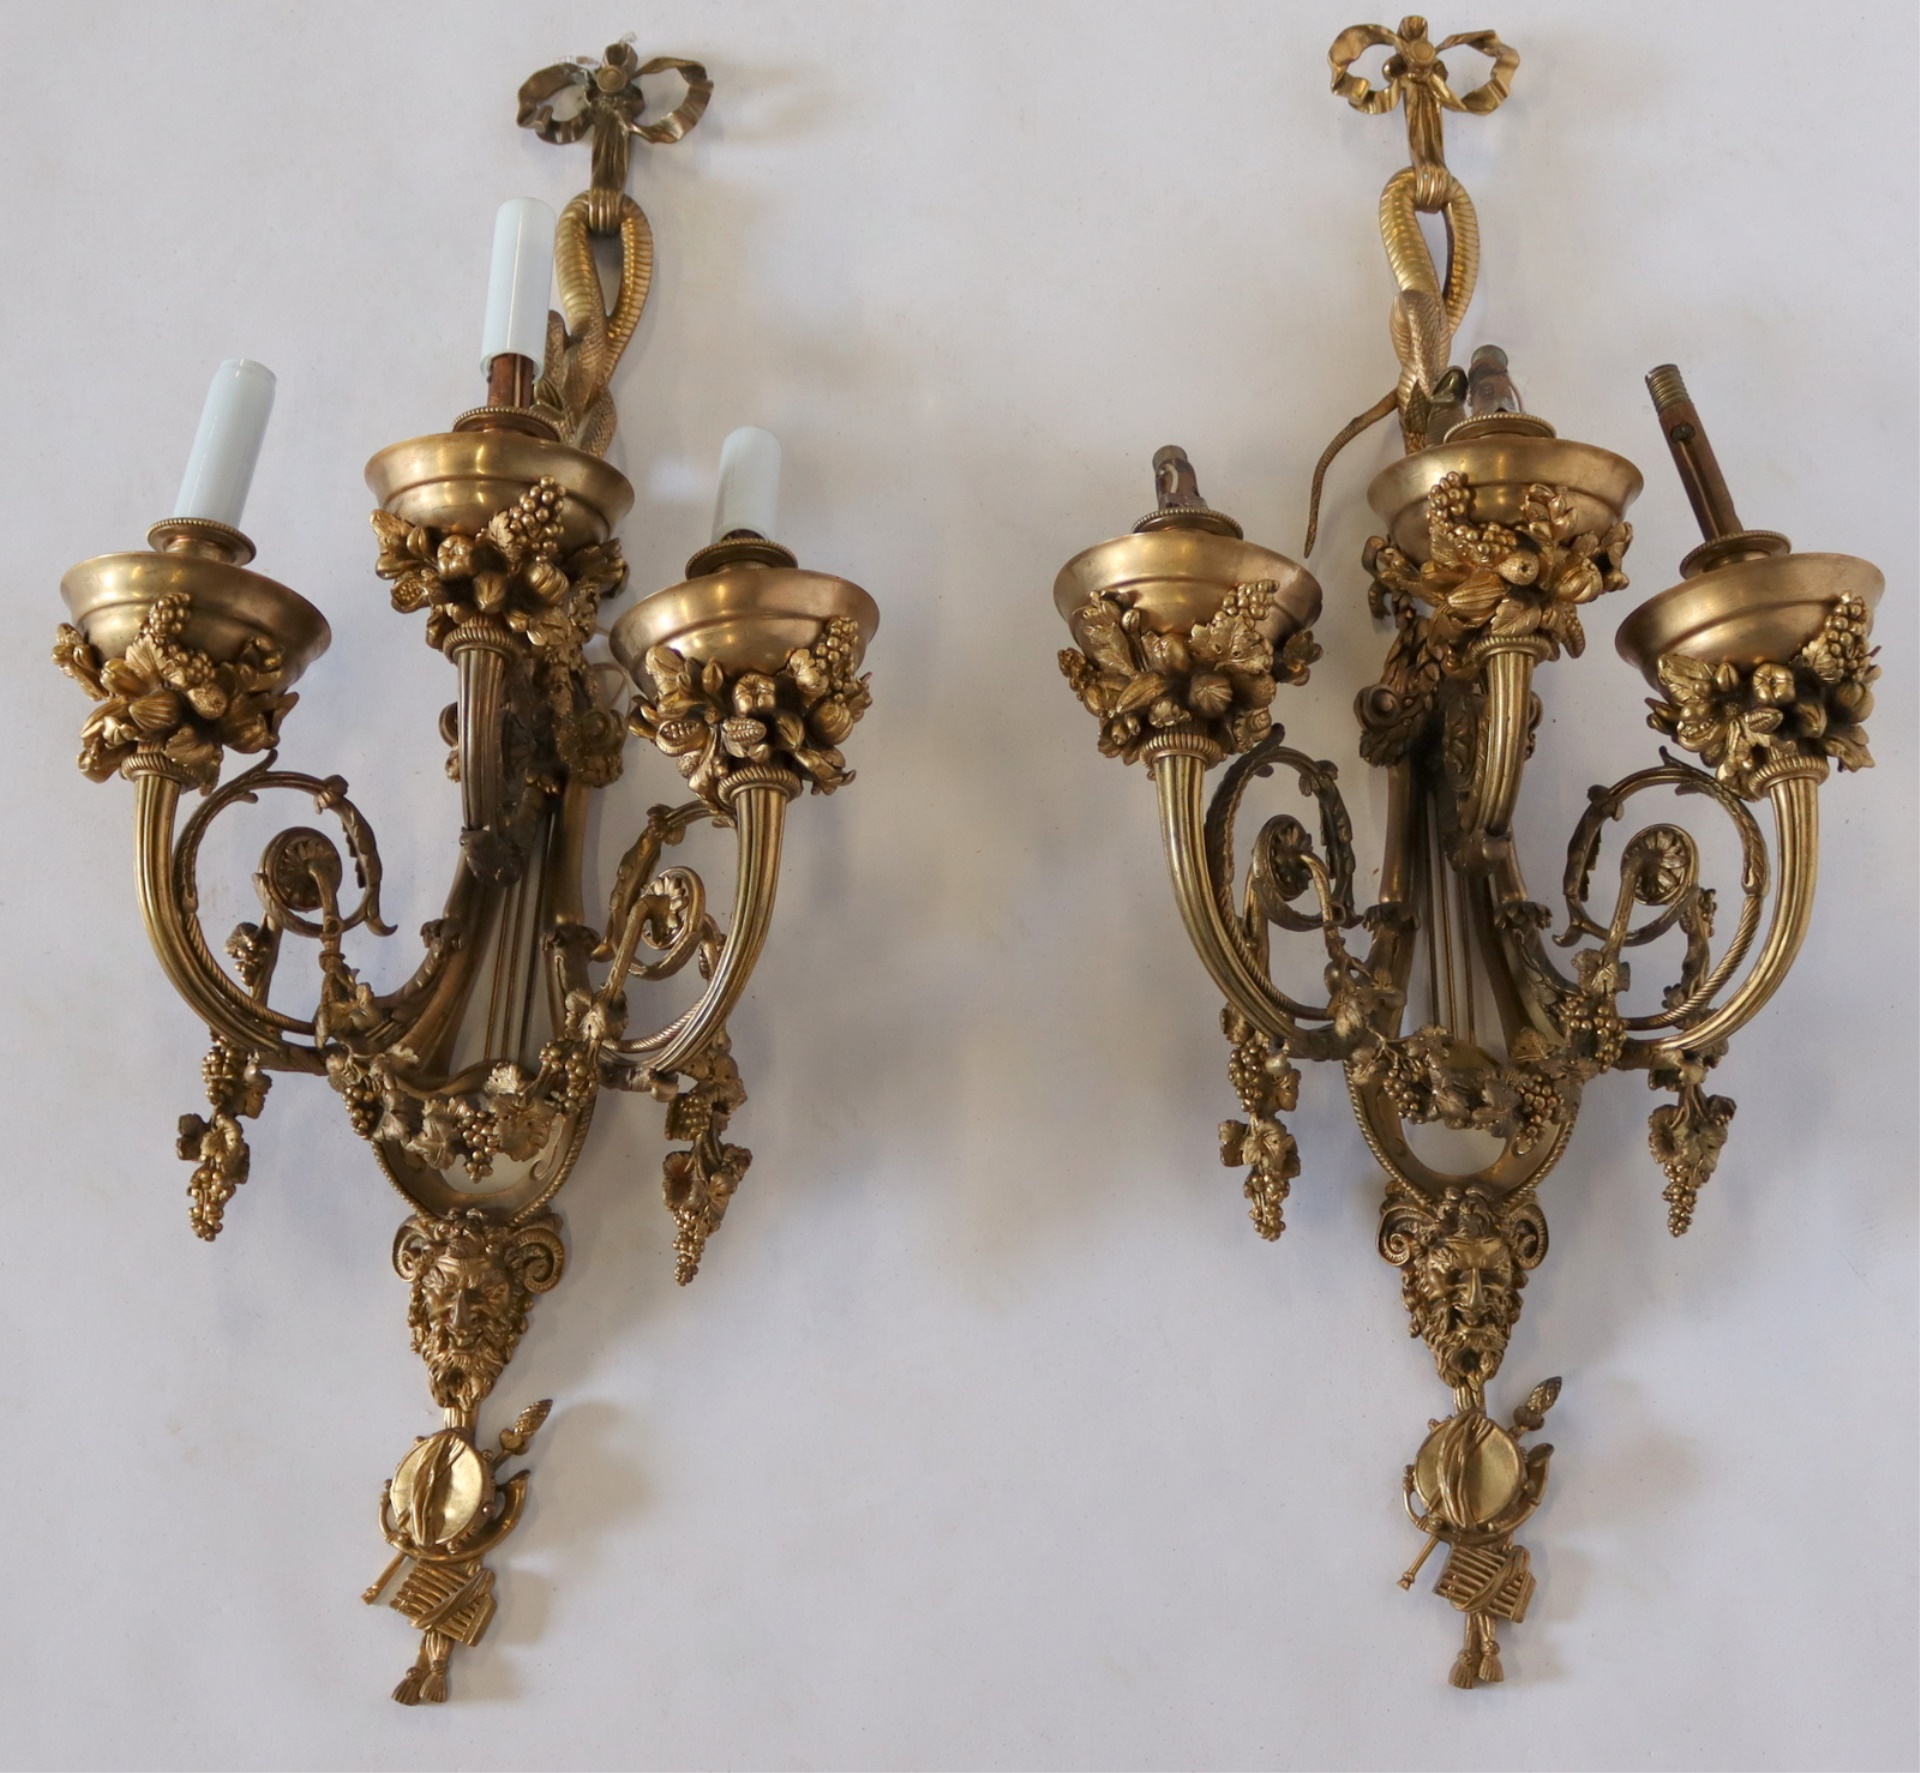 PAIR OF SIGNED HENRY VIAN GILT 3bd1a9